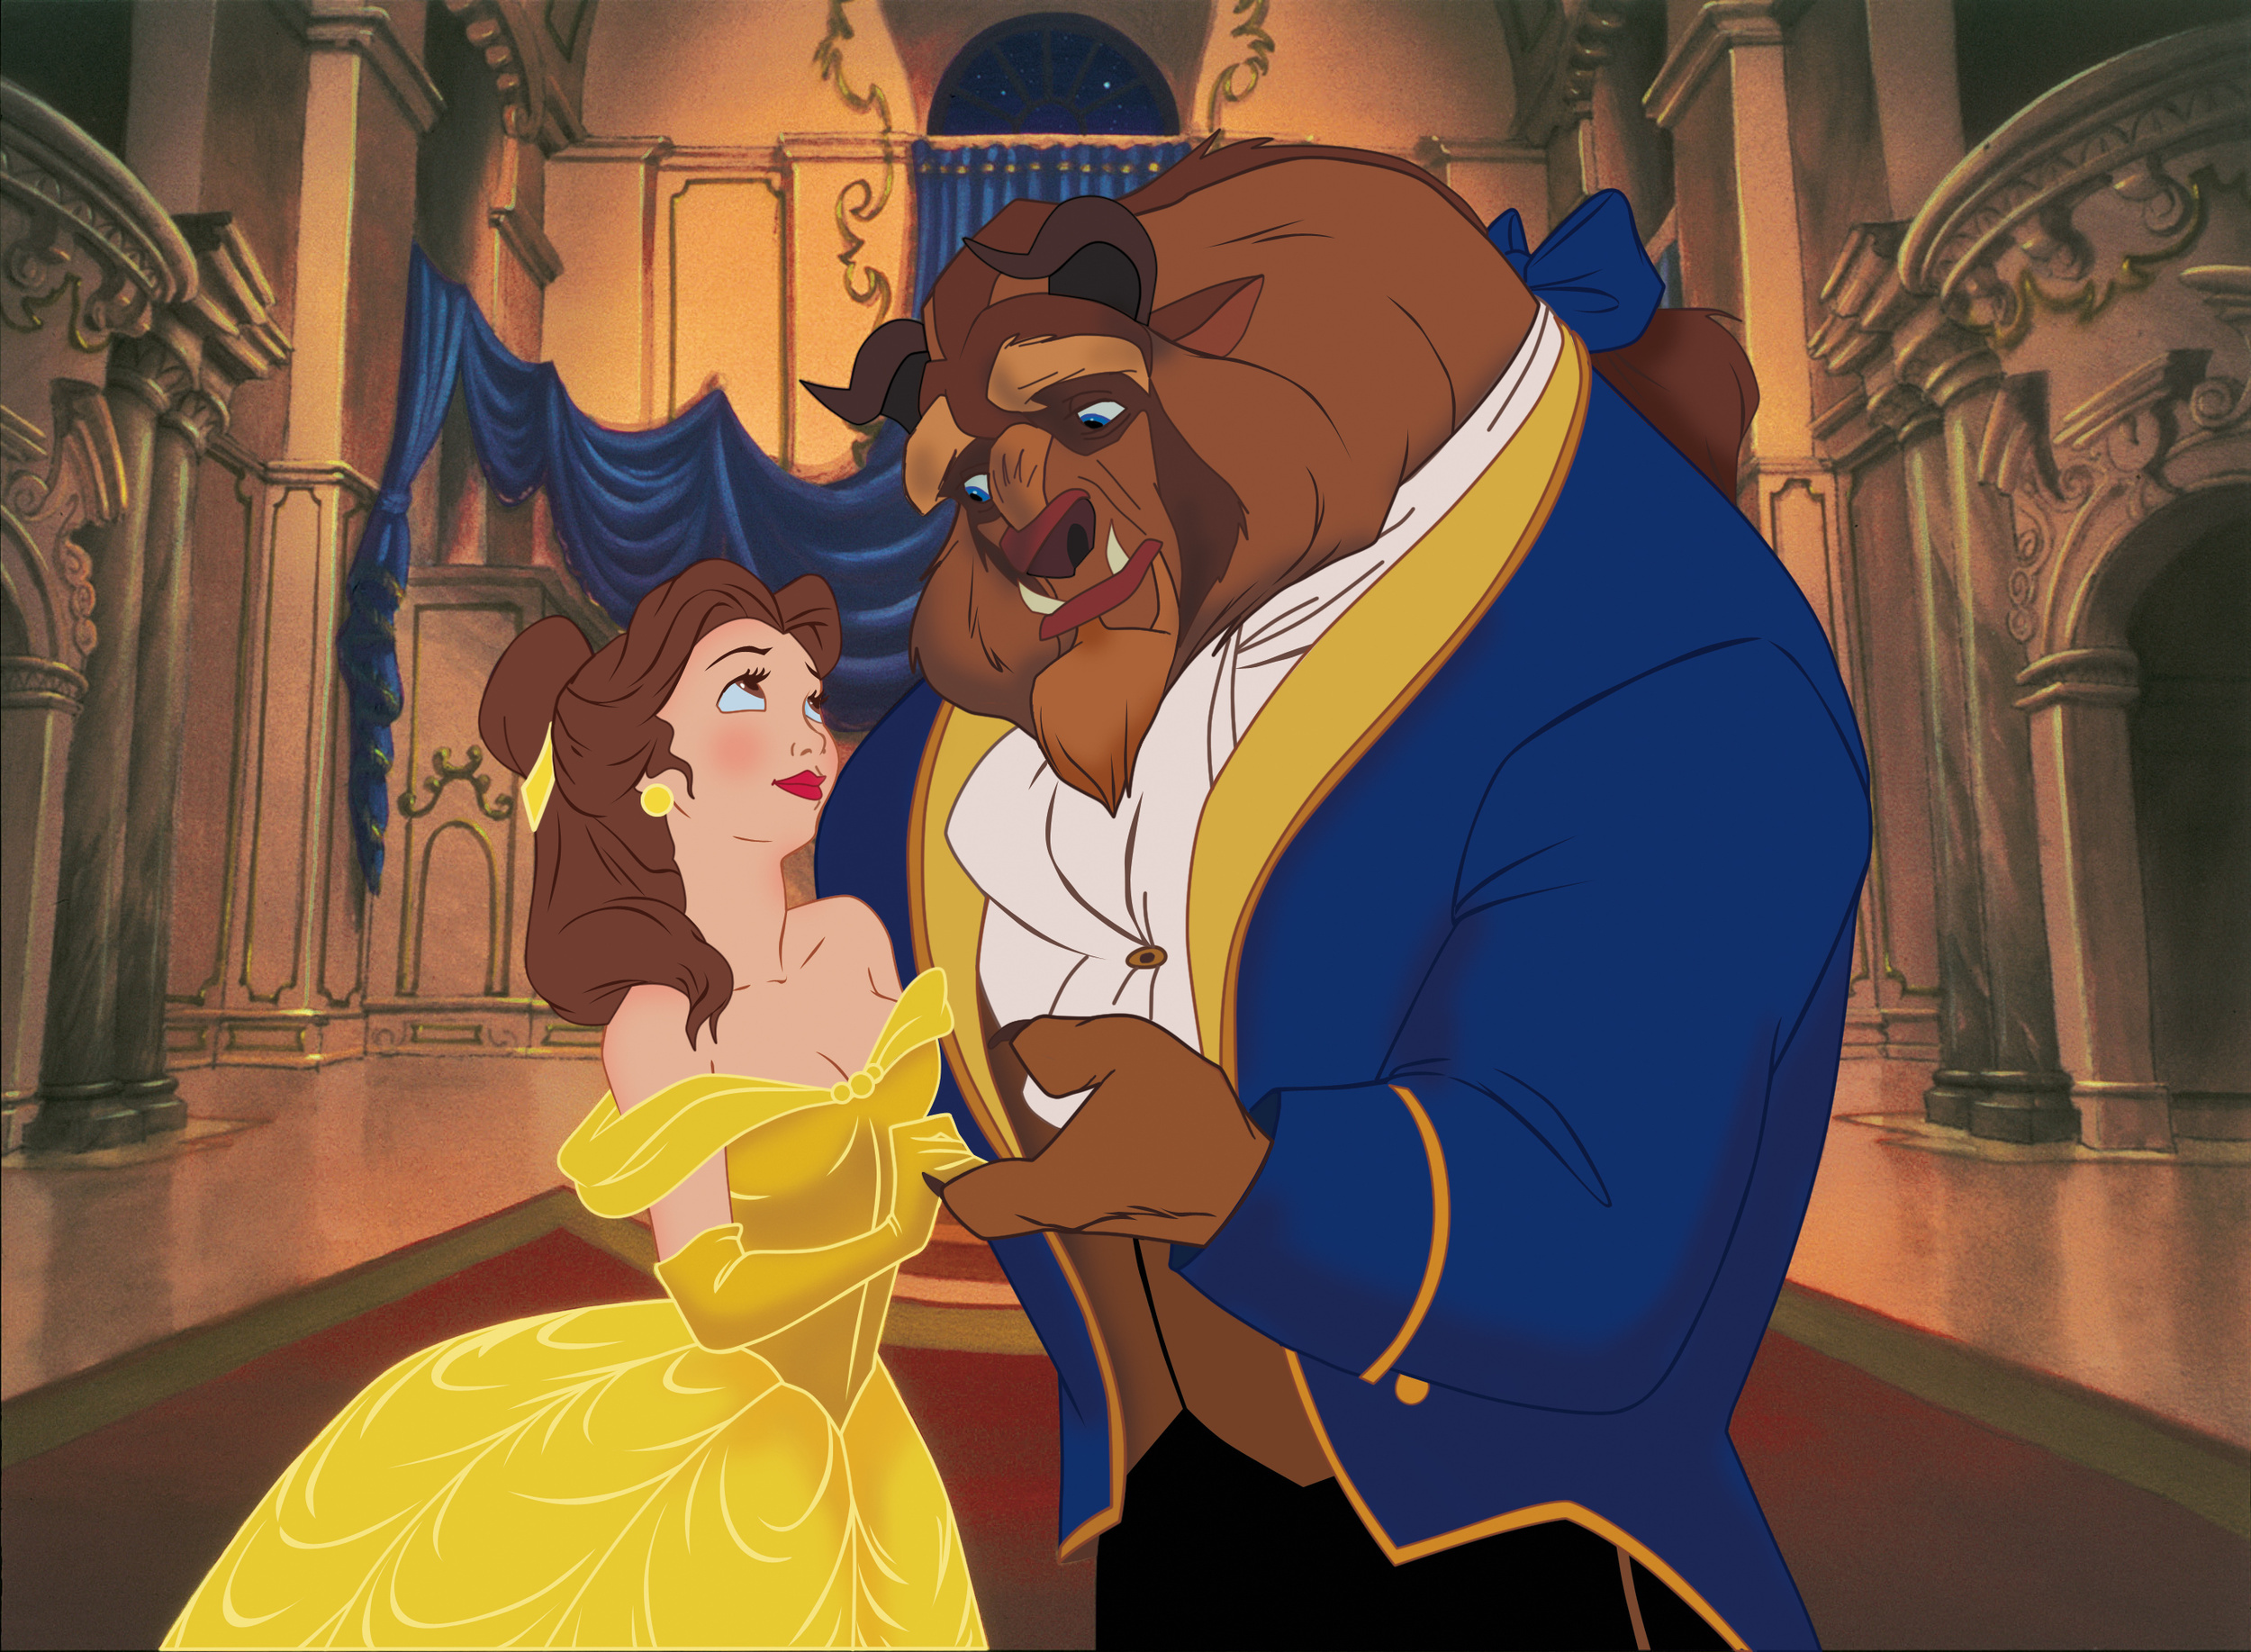 <p>The Walt Disney Studios set another huge record with this stunning and timeless classic. </p><p>The Academy Awards granted a Best Picture Oscar to its first animated feature ever in 1992 with Disney's <em>Beauty and the Beast</em> based on the classic 18th-century fairytale. The film worked brilliantly on every level. The animators utilized computer technology to create the stunning ballroom dance scene. The songs written by Oscar-winner Alan Menken make the story pop with vibrant sounds and colors. The characters are voiced by the likes of Angela Lansbury, David Ogden Stiers, and Jerry Orbach, but they get so deep into their characters that you don't recognize them. It is unquestionably the culmination of Disney's vision for his studios and the medium of film. </p><p>You may also like: <a href='https://www.yardbarker.com/entertainment/articles/what_are_the_must_see_concerts_of_2024/s1__40032109'>What are the must-see concerts of 2024?</a></p>